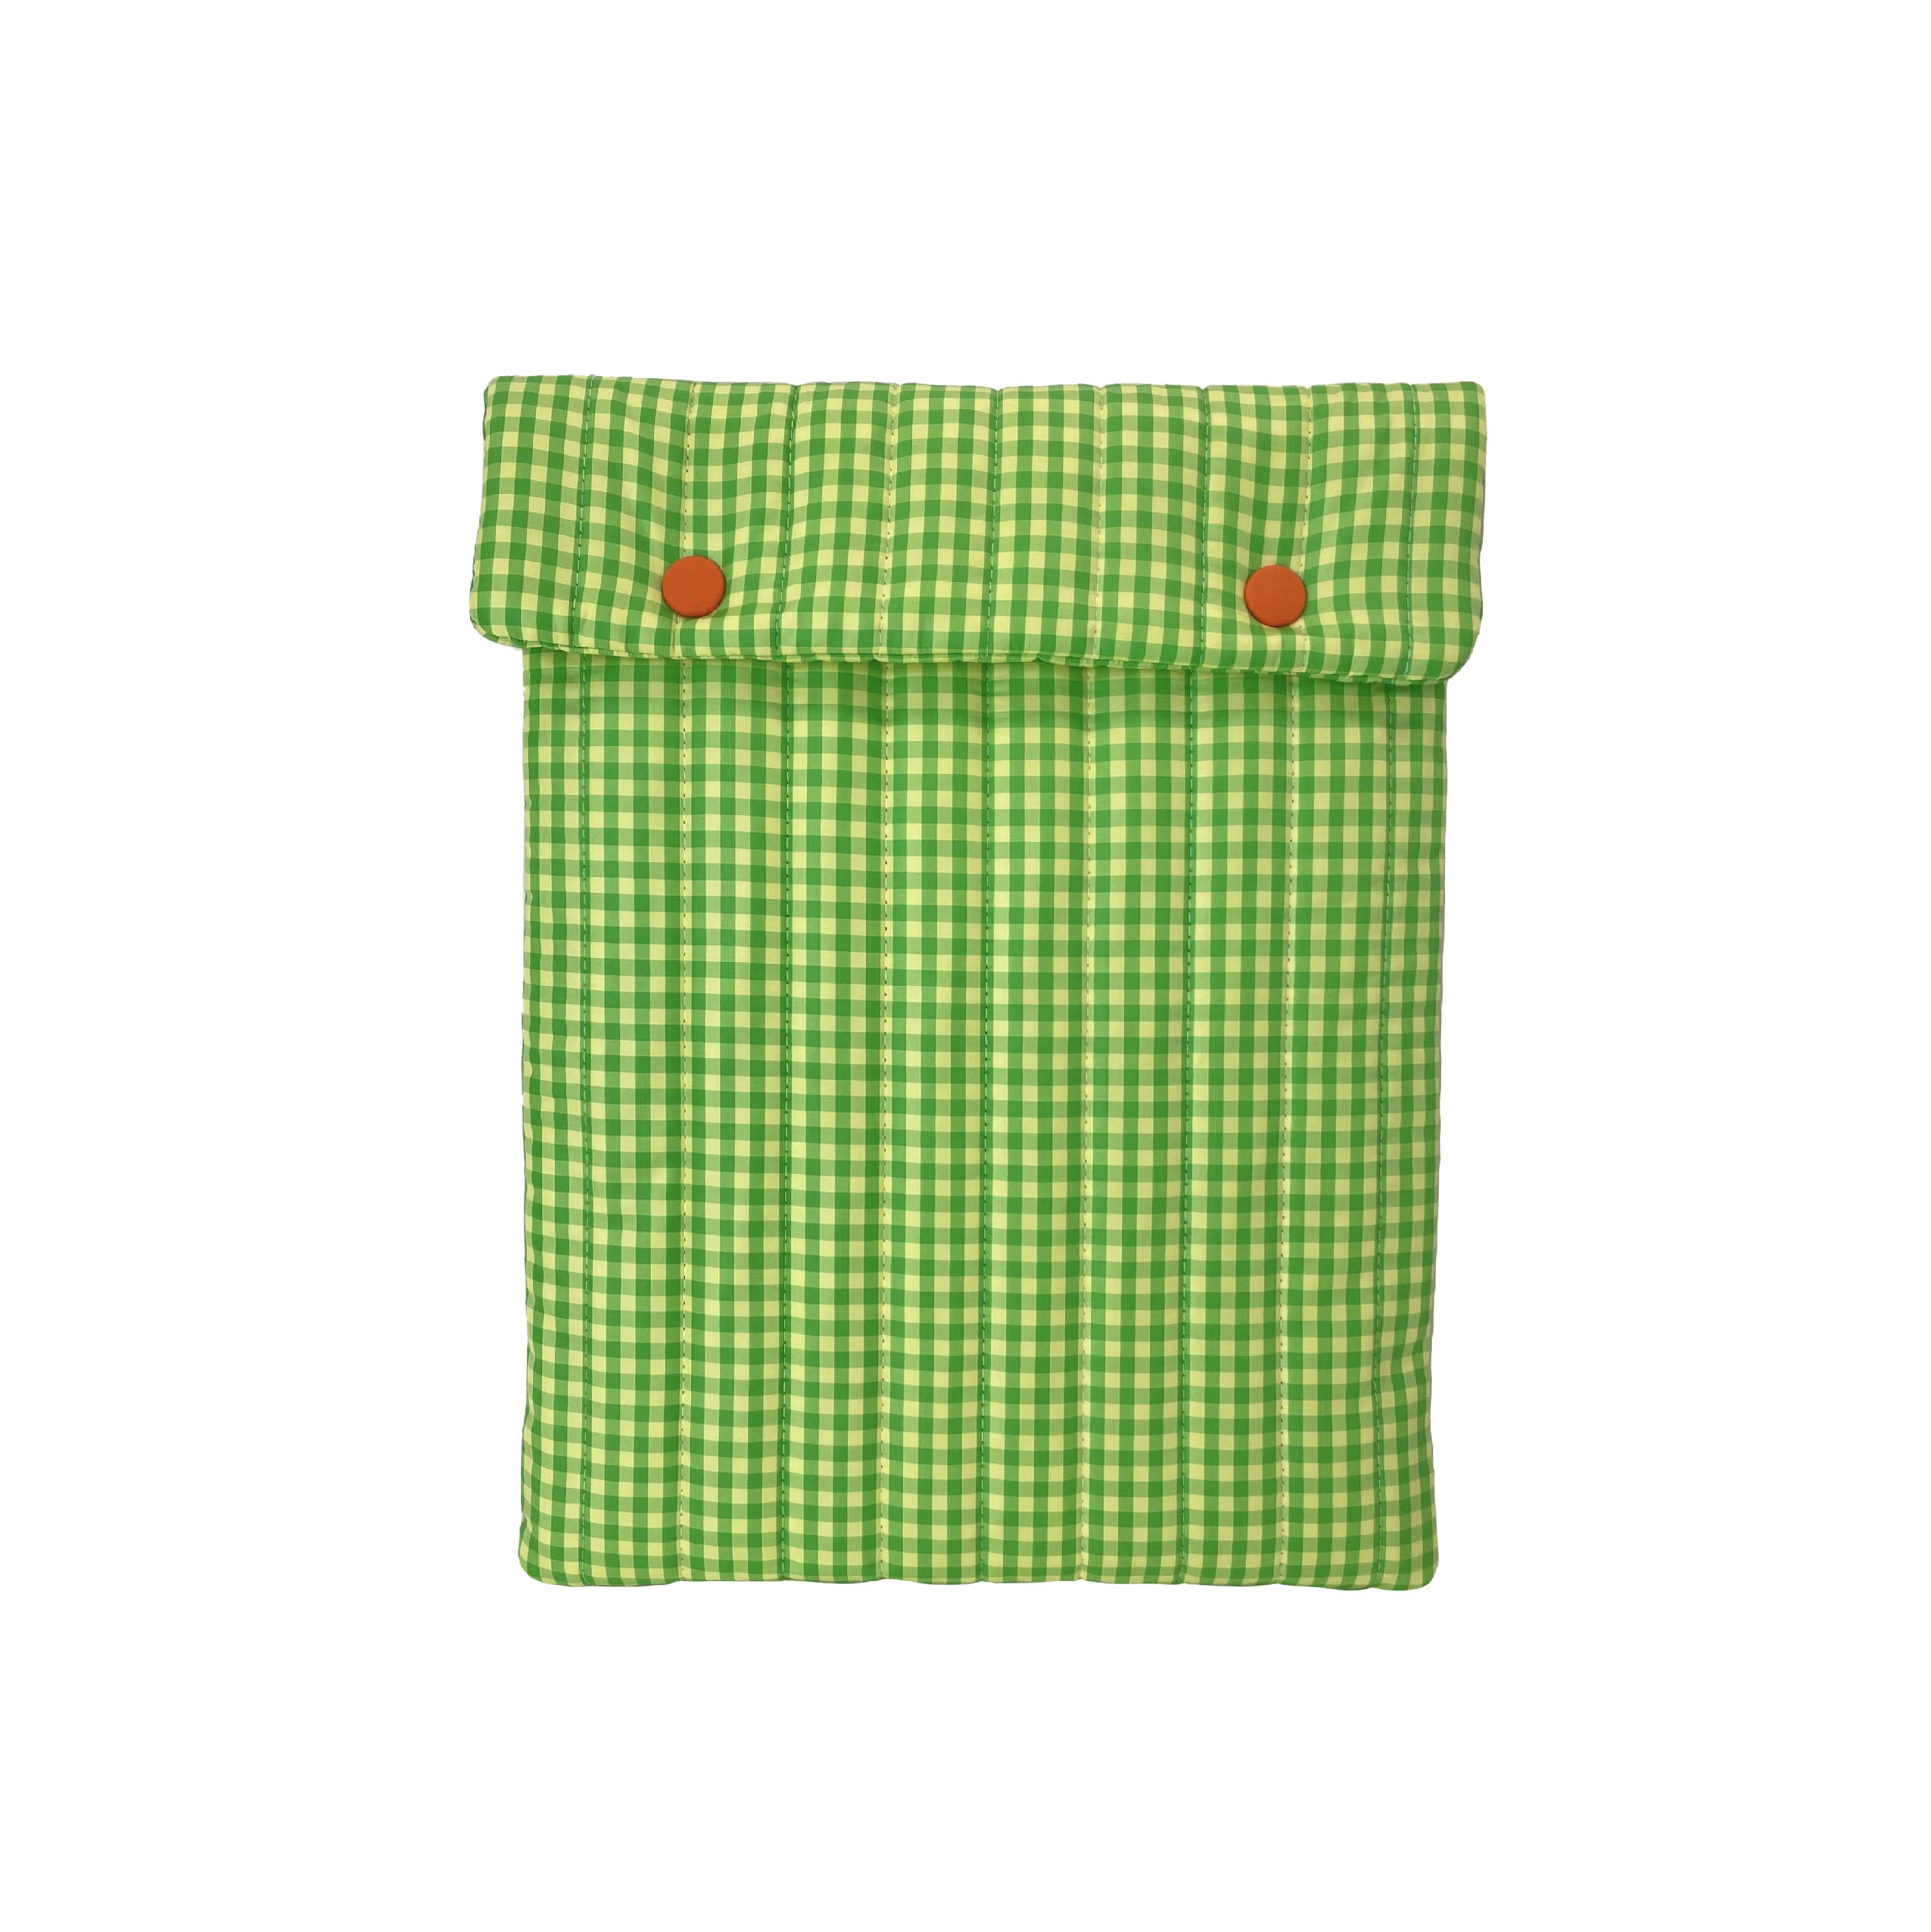 I pad pouch_Green